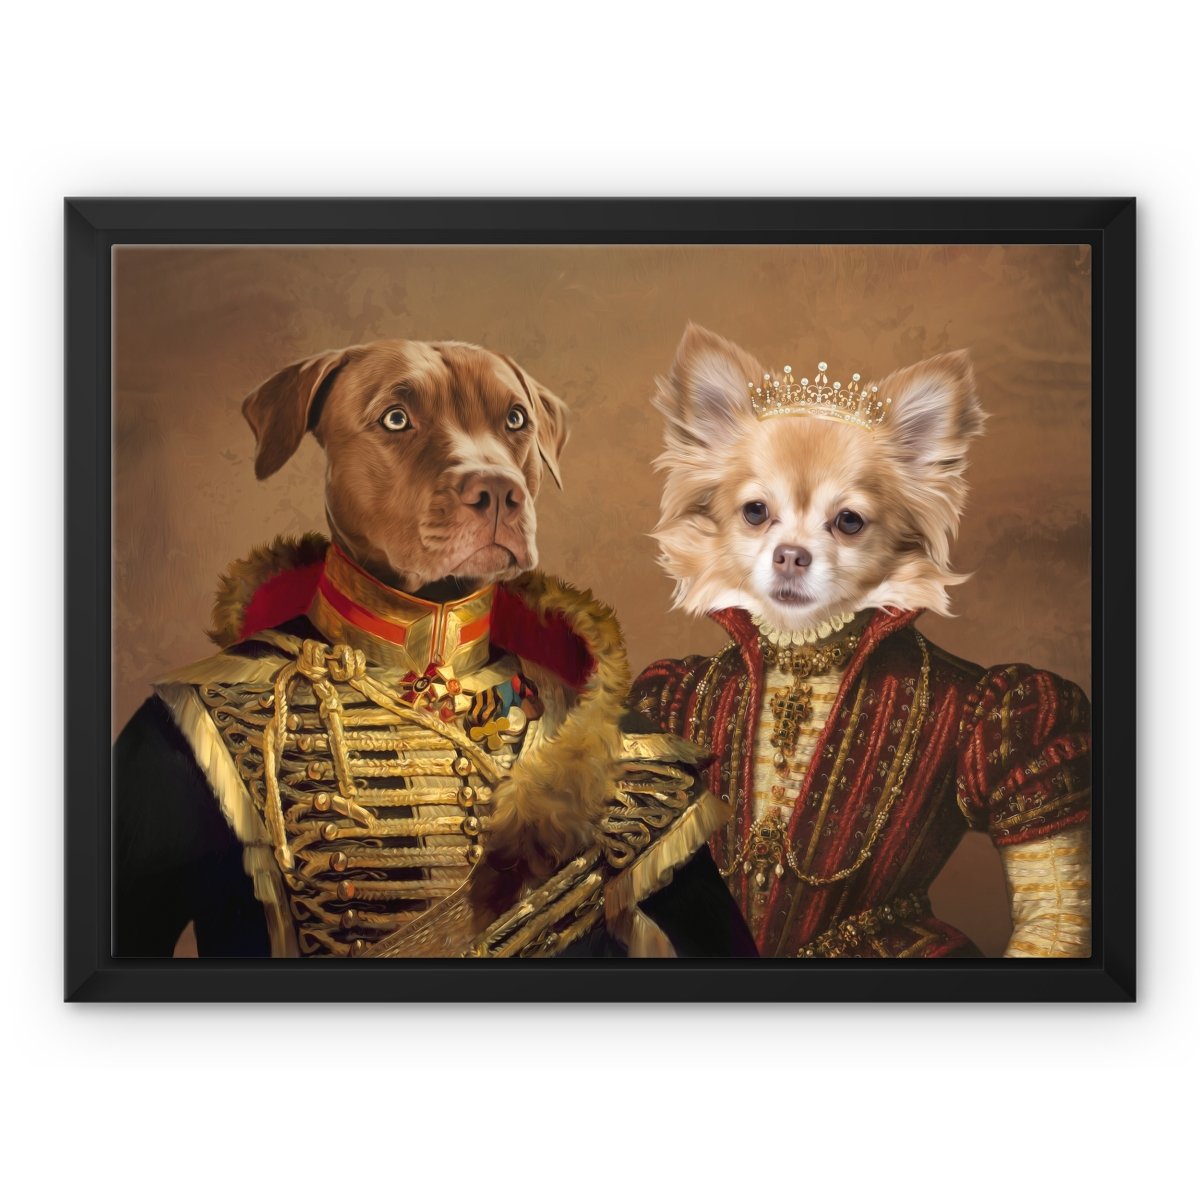 The Betrothed: Custom Pet Canvas - Paw & Glory - #pet portraits# - #dog portraits# - #pet portraits uk#paw and glory, pet portraits canvas,dog canvas bag, dog wall art canvas, dog canvas print, pet photo to canvas, pet canvas portraits